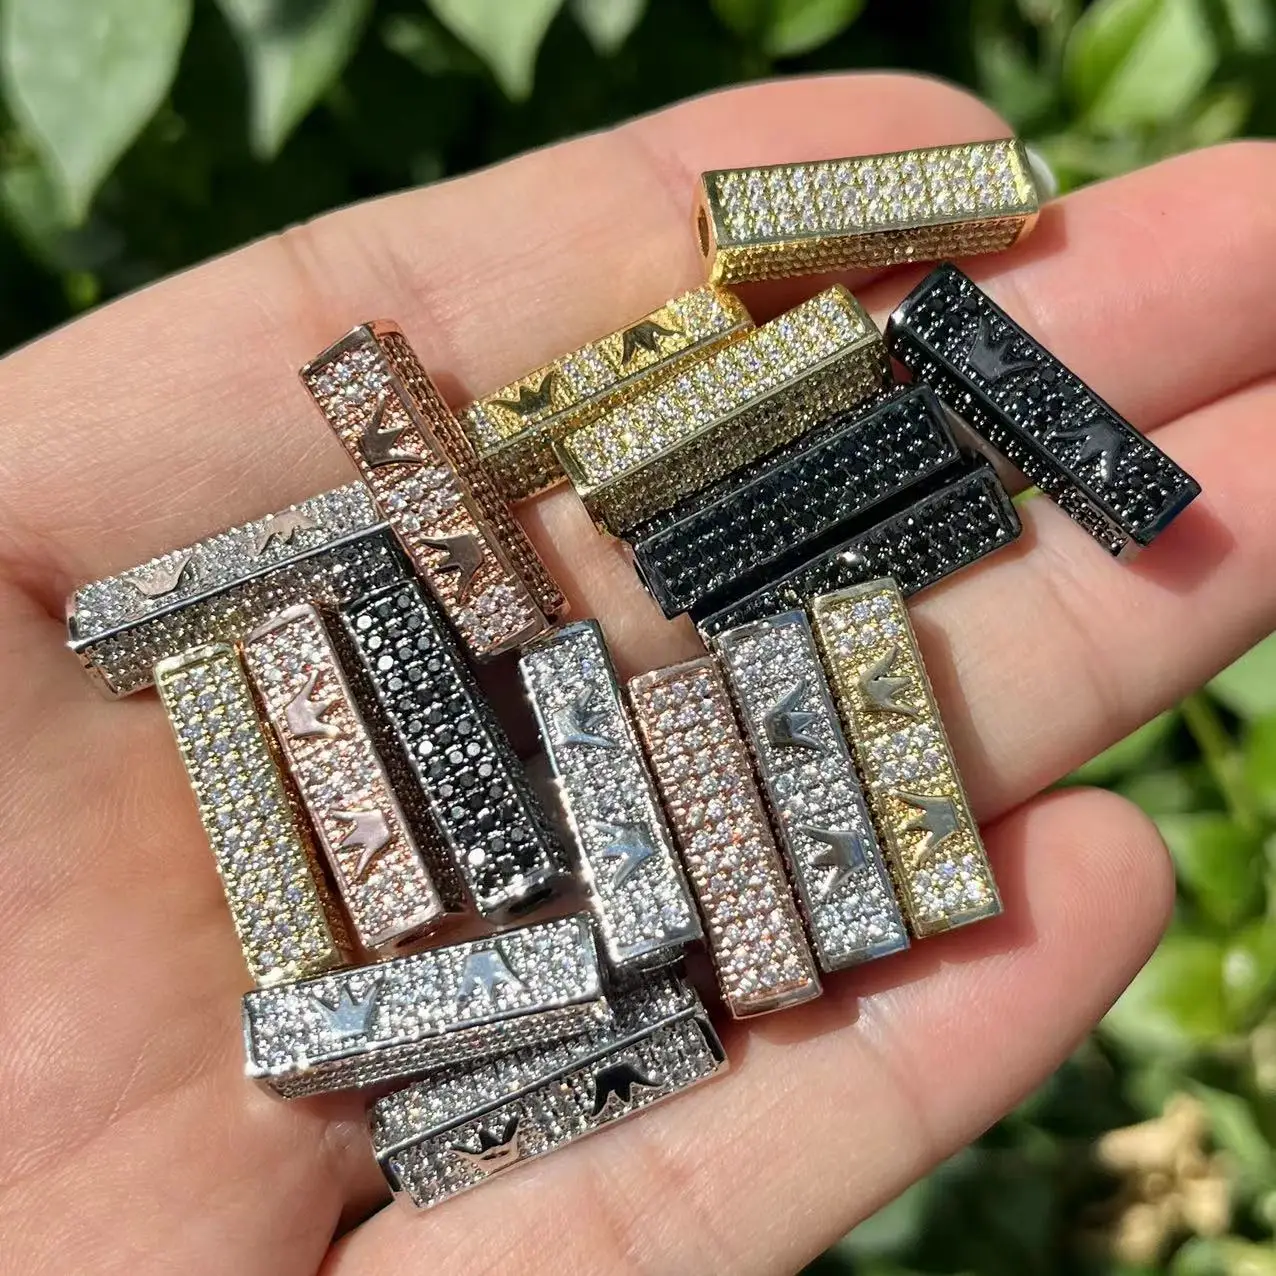 

5Pcs/Lot Zirconia Pave Cube Bar Spacer Bead Jewelry Findings for Custom Design Bracelets Necklace Hand Making